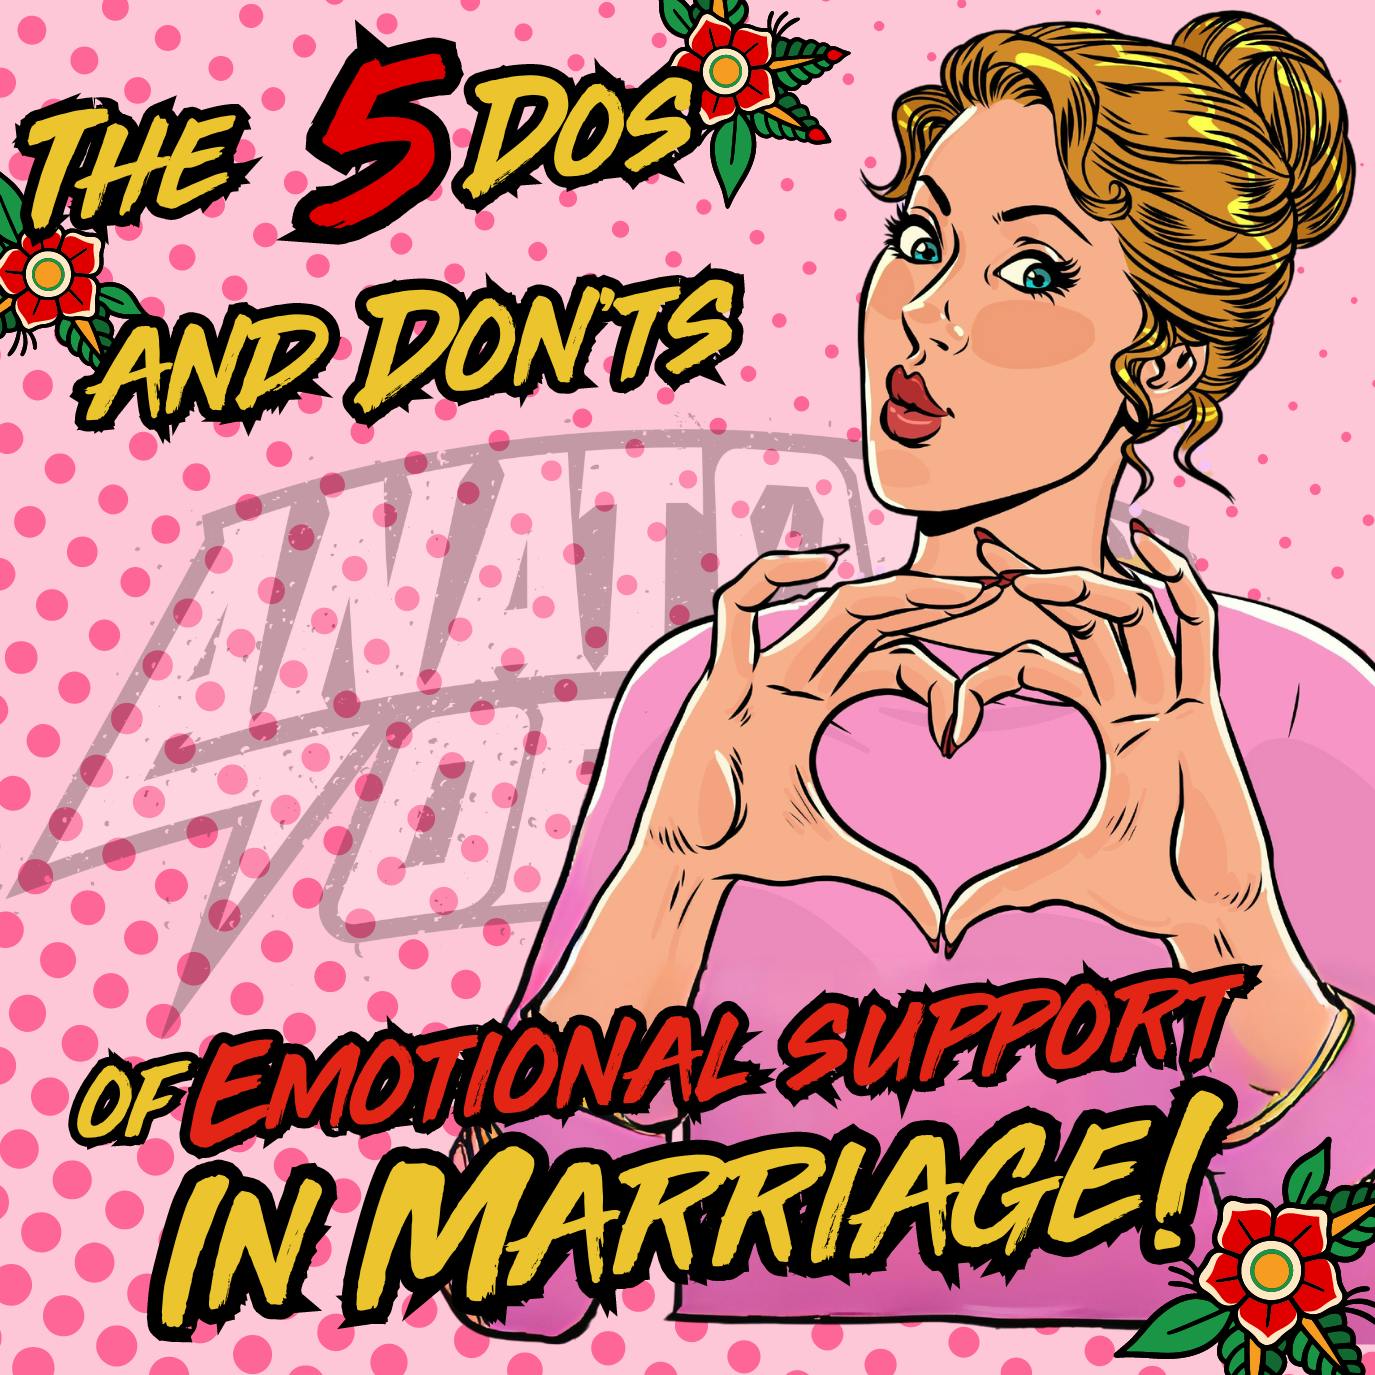 The Five Dos and Don’ts of Emotional Support in Marriage